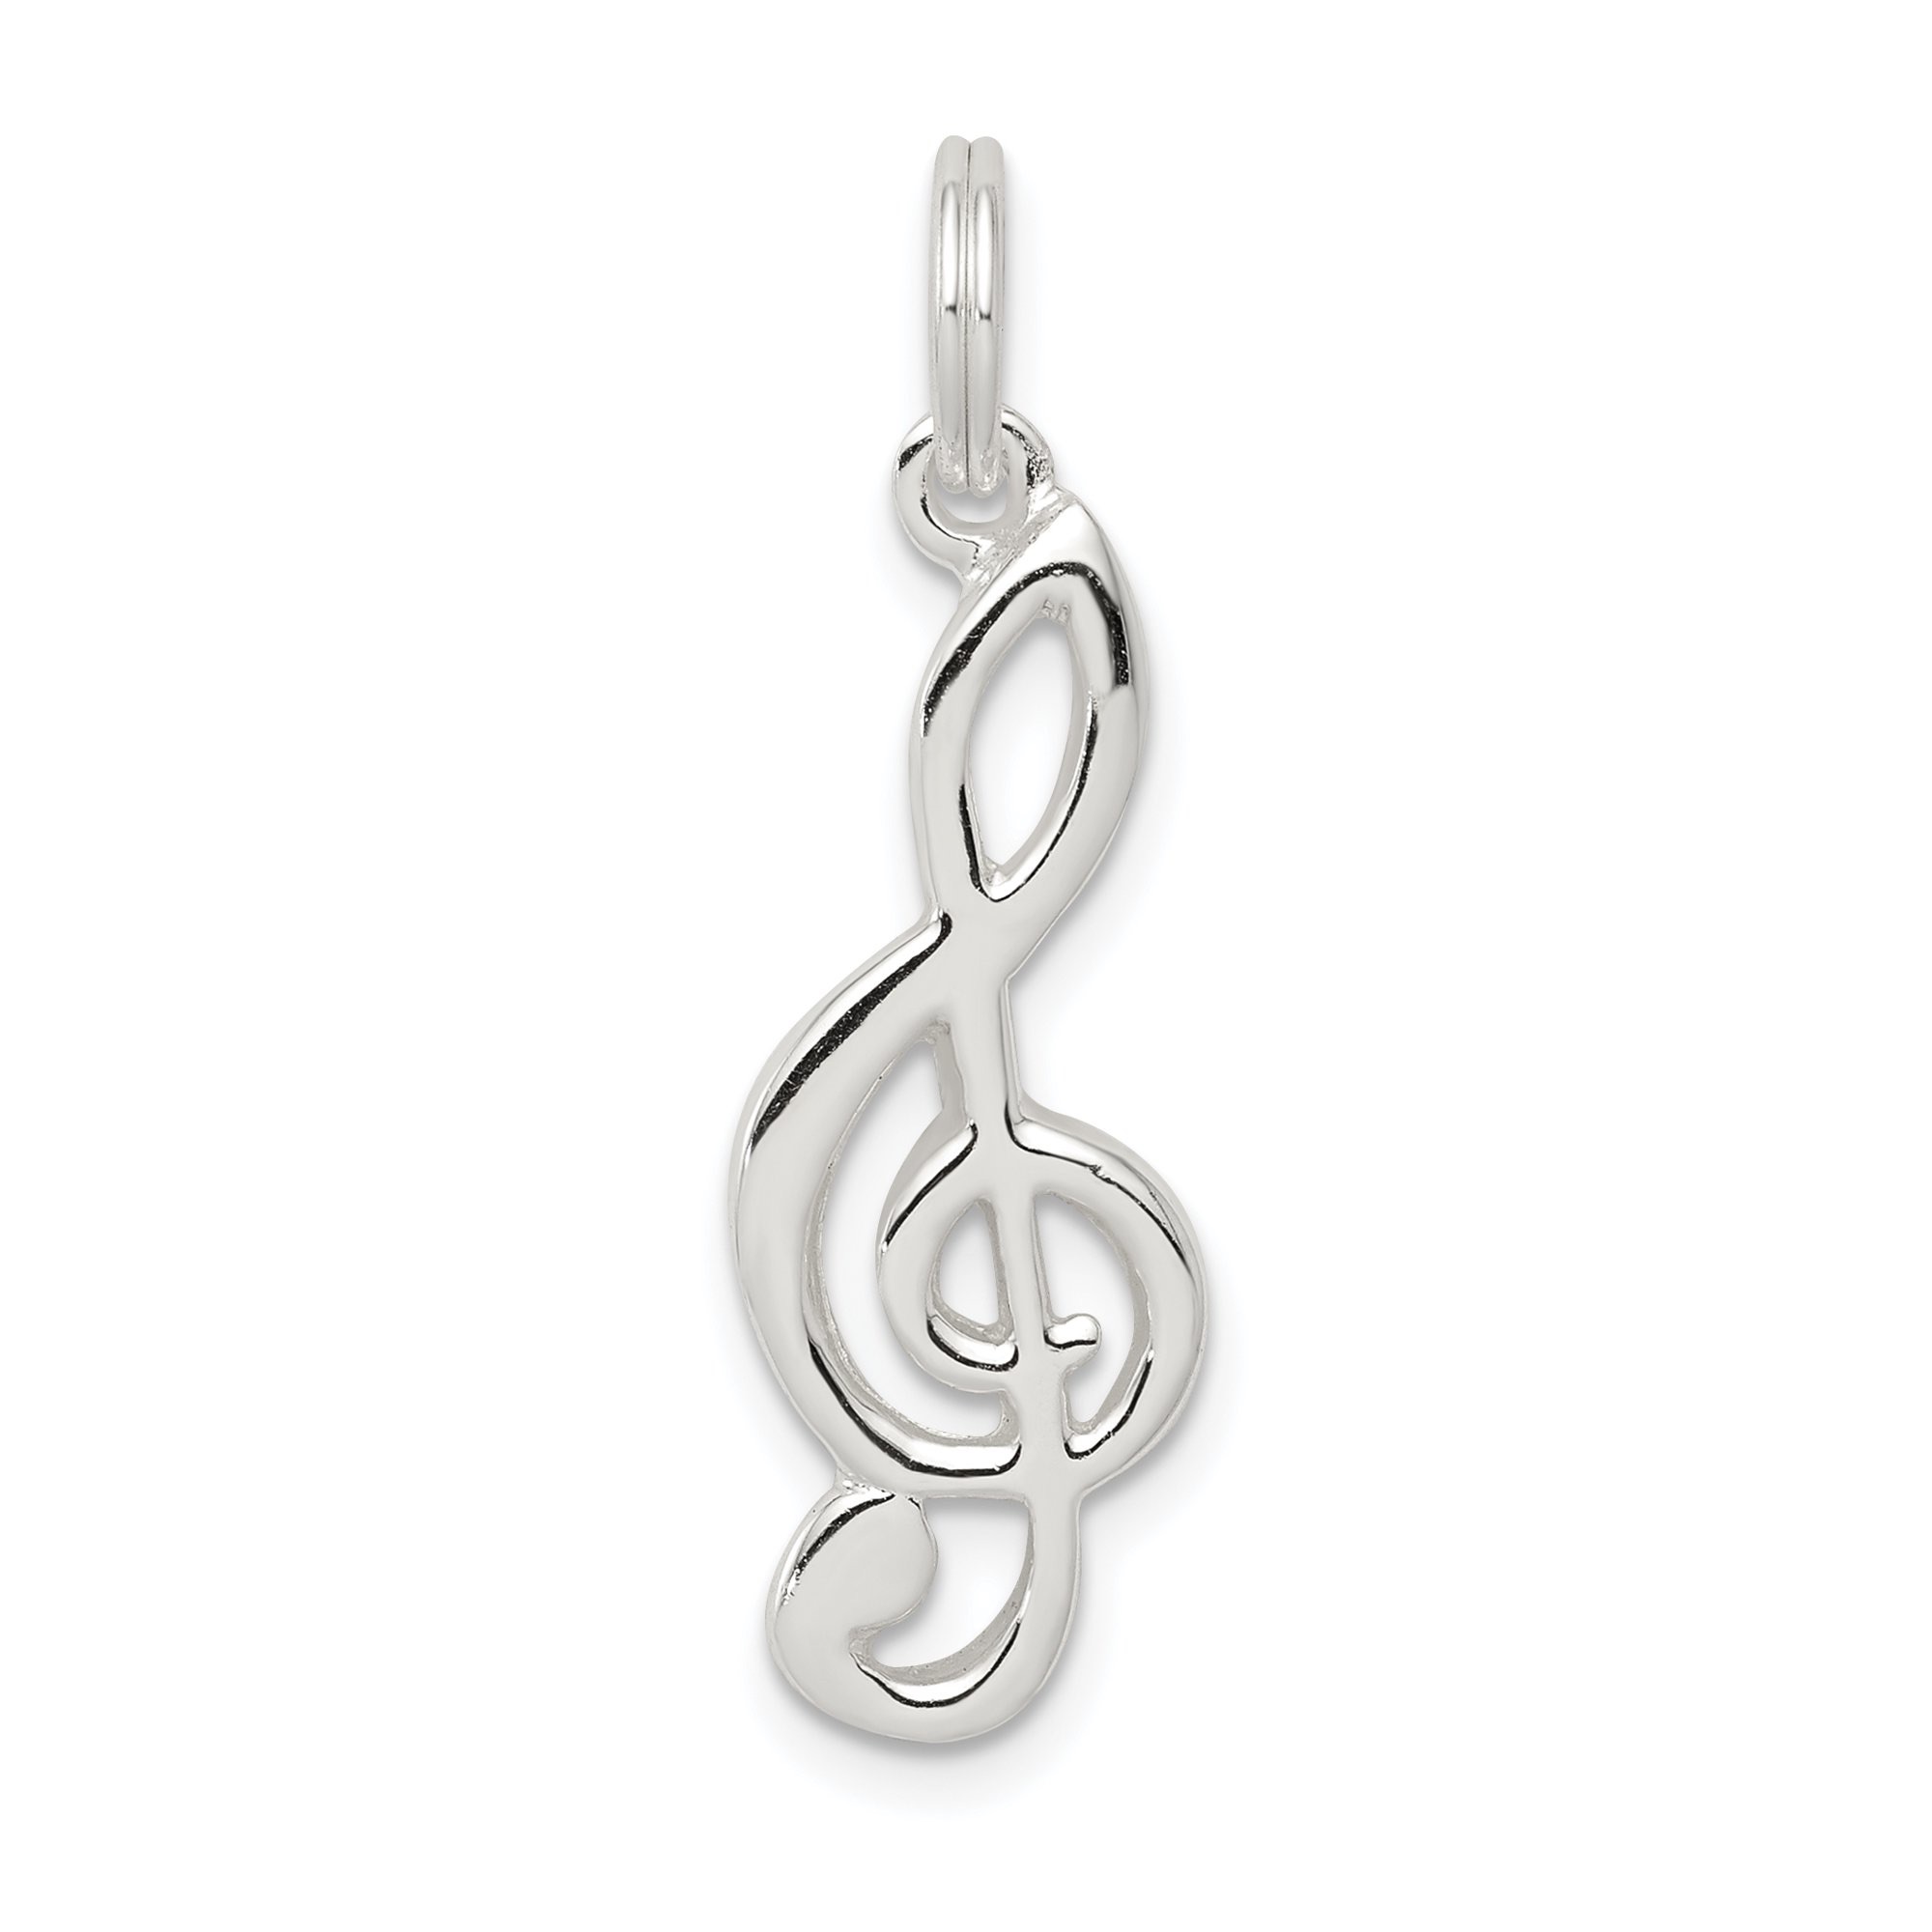 IceCarats - 925 Sterling Silver Music Note 银项链Pendant Charm Necklace Musical Fine Jewelry Ideal Gifts For Women Gift Set From Heart - Walmart.com - Walmart.com